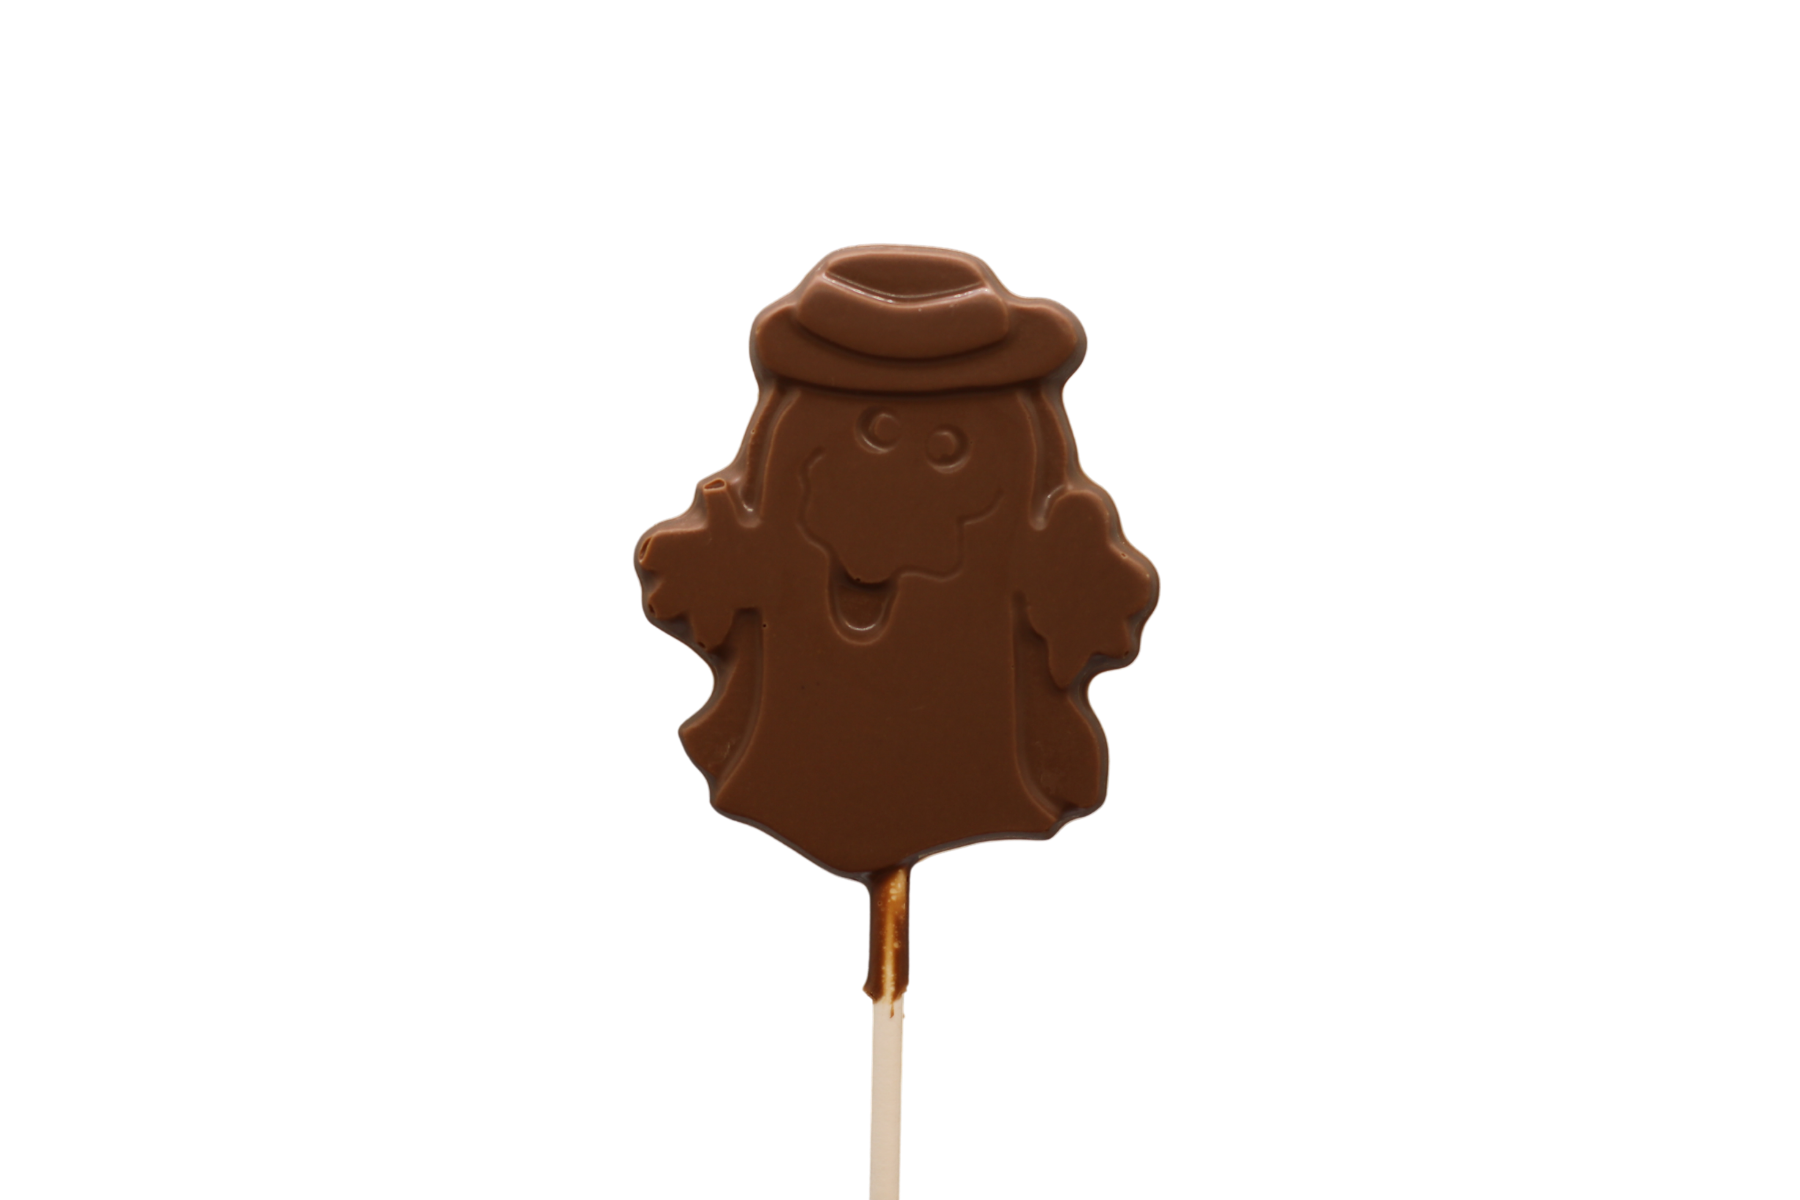 Ghost-shaped chocolate lollipop with Halloween motif